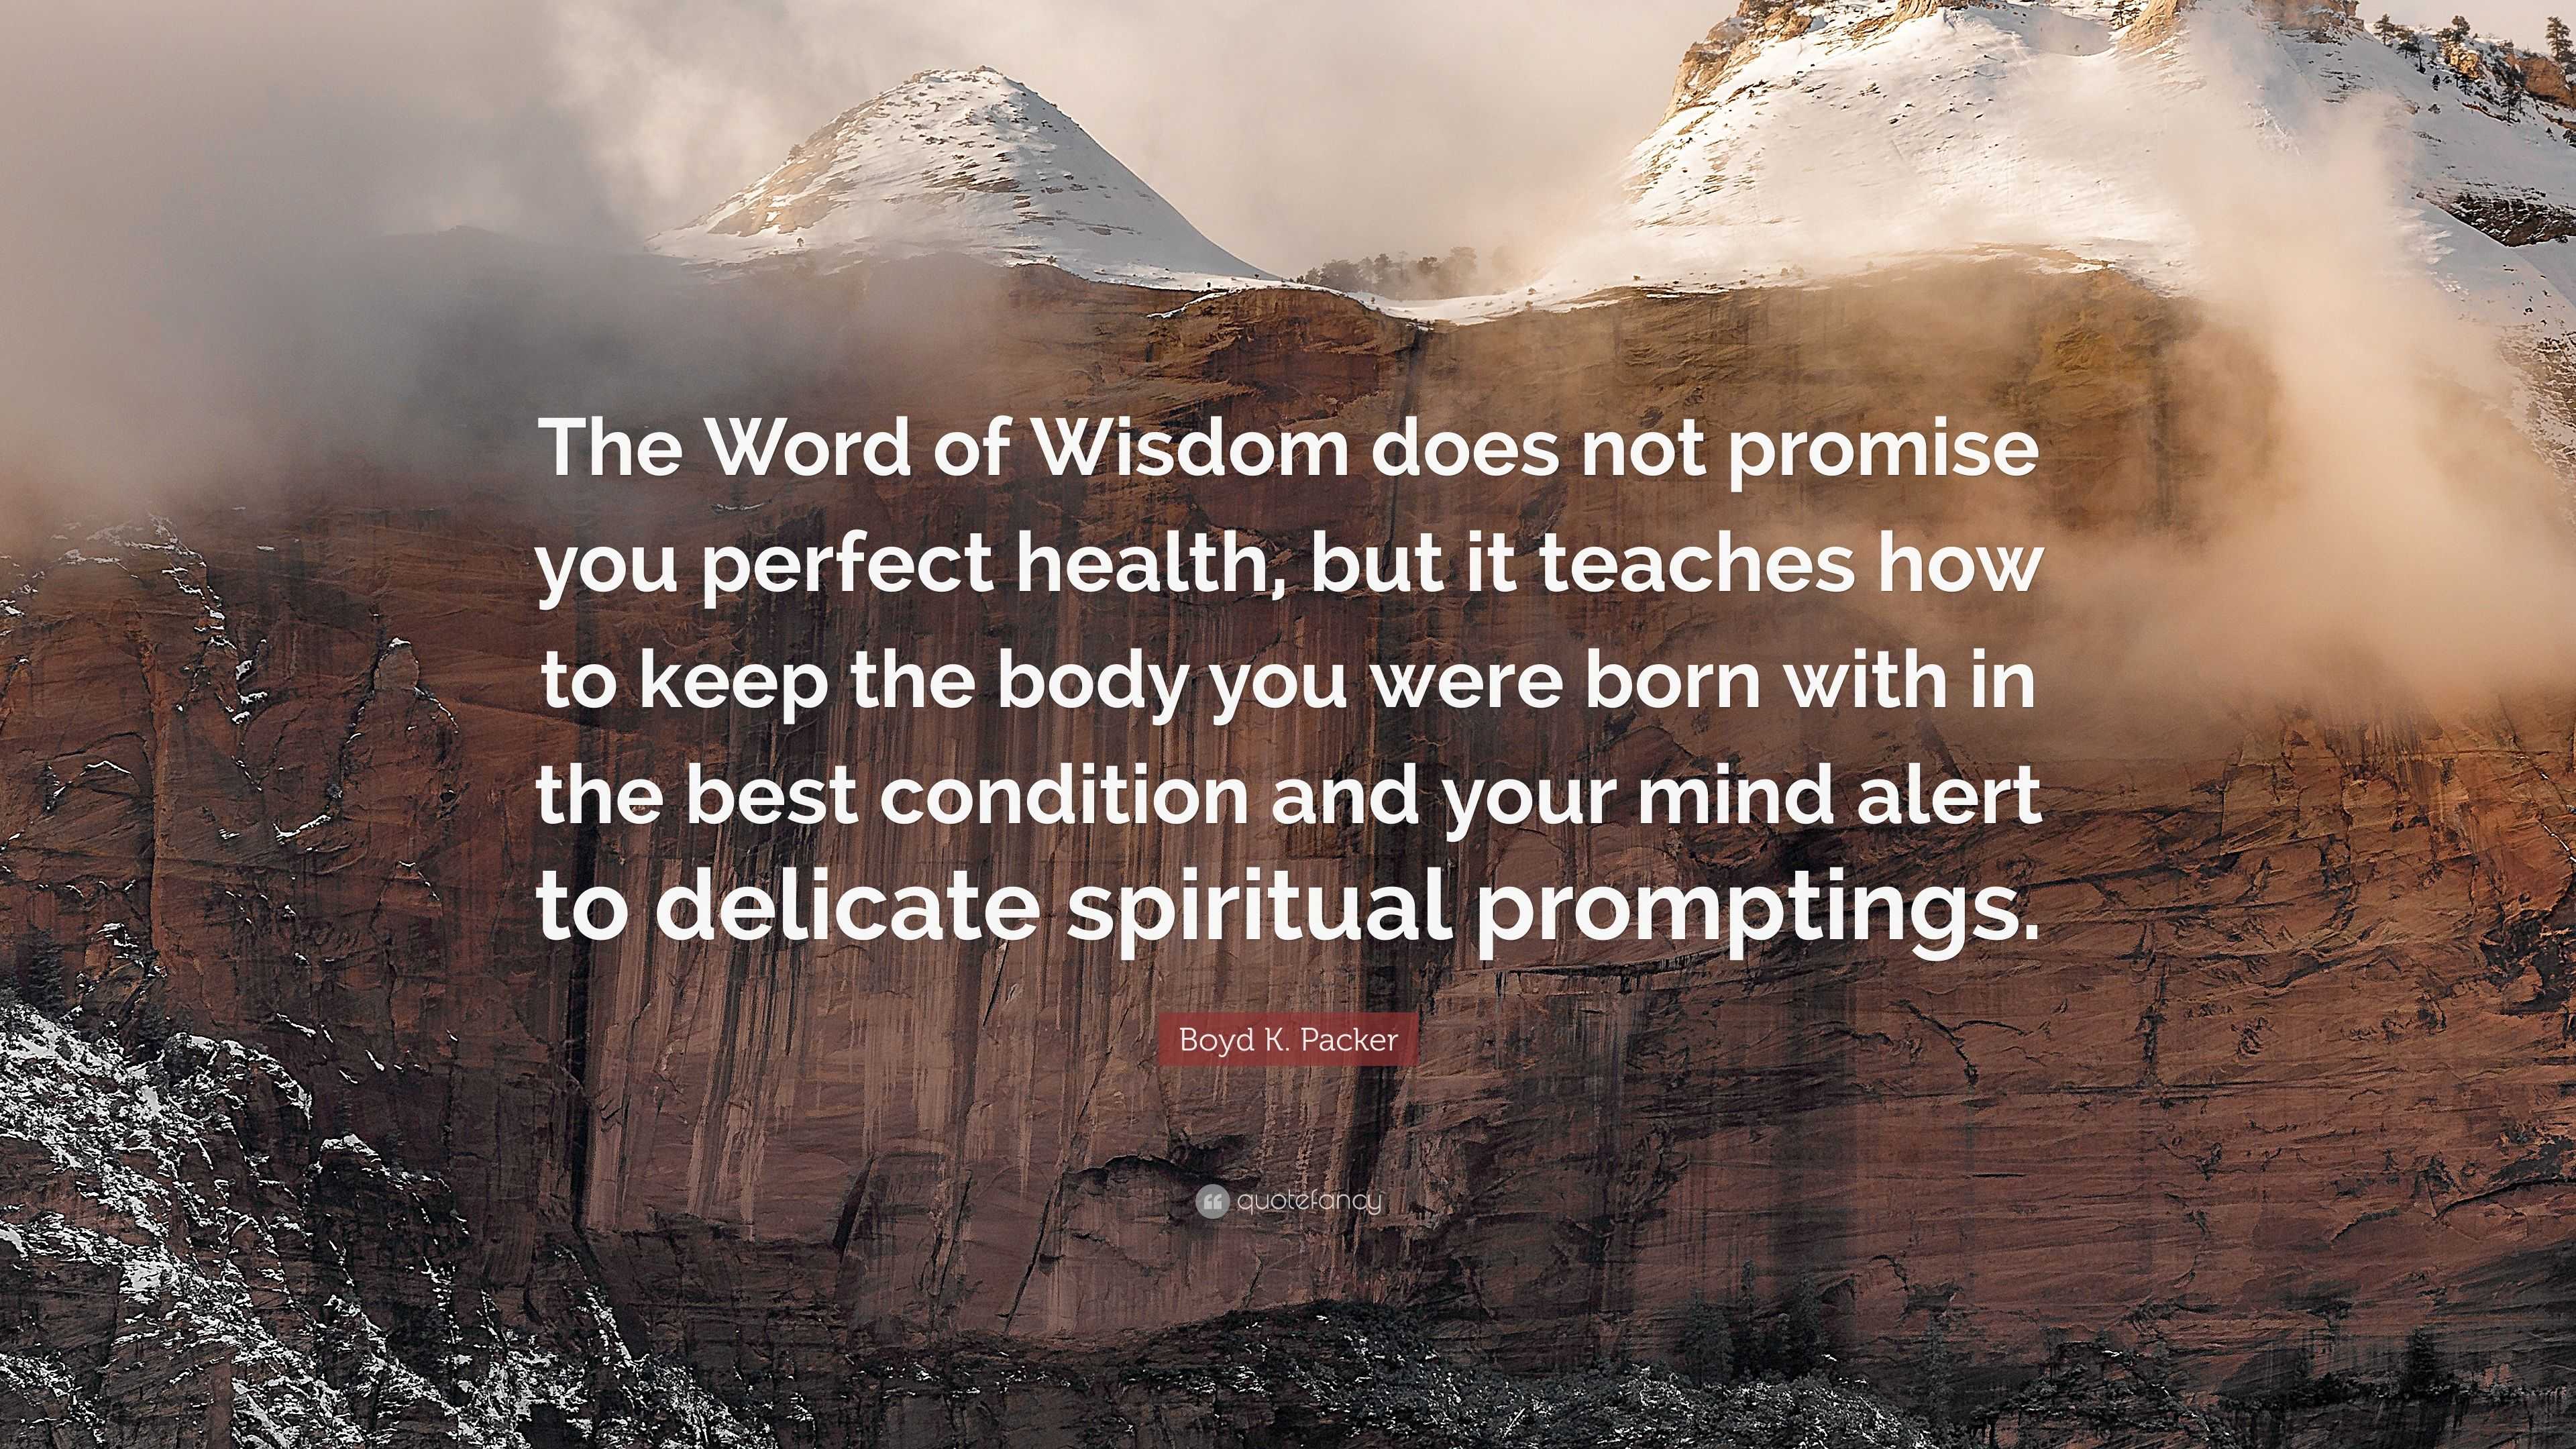 Boyd K. Packer Quote: “The Word of Wisdom does not promise you perfect ...